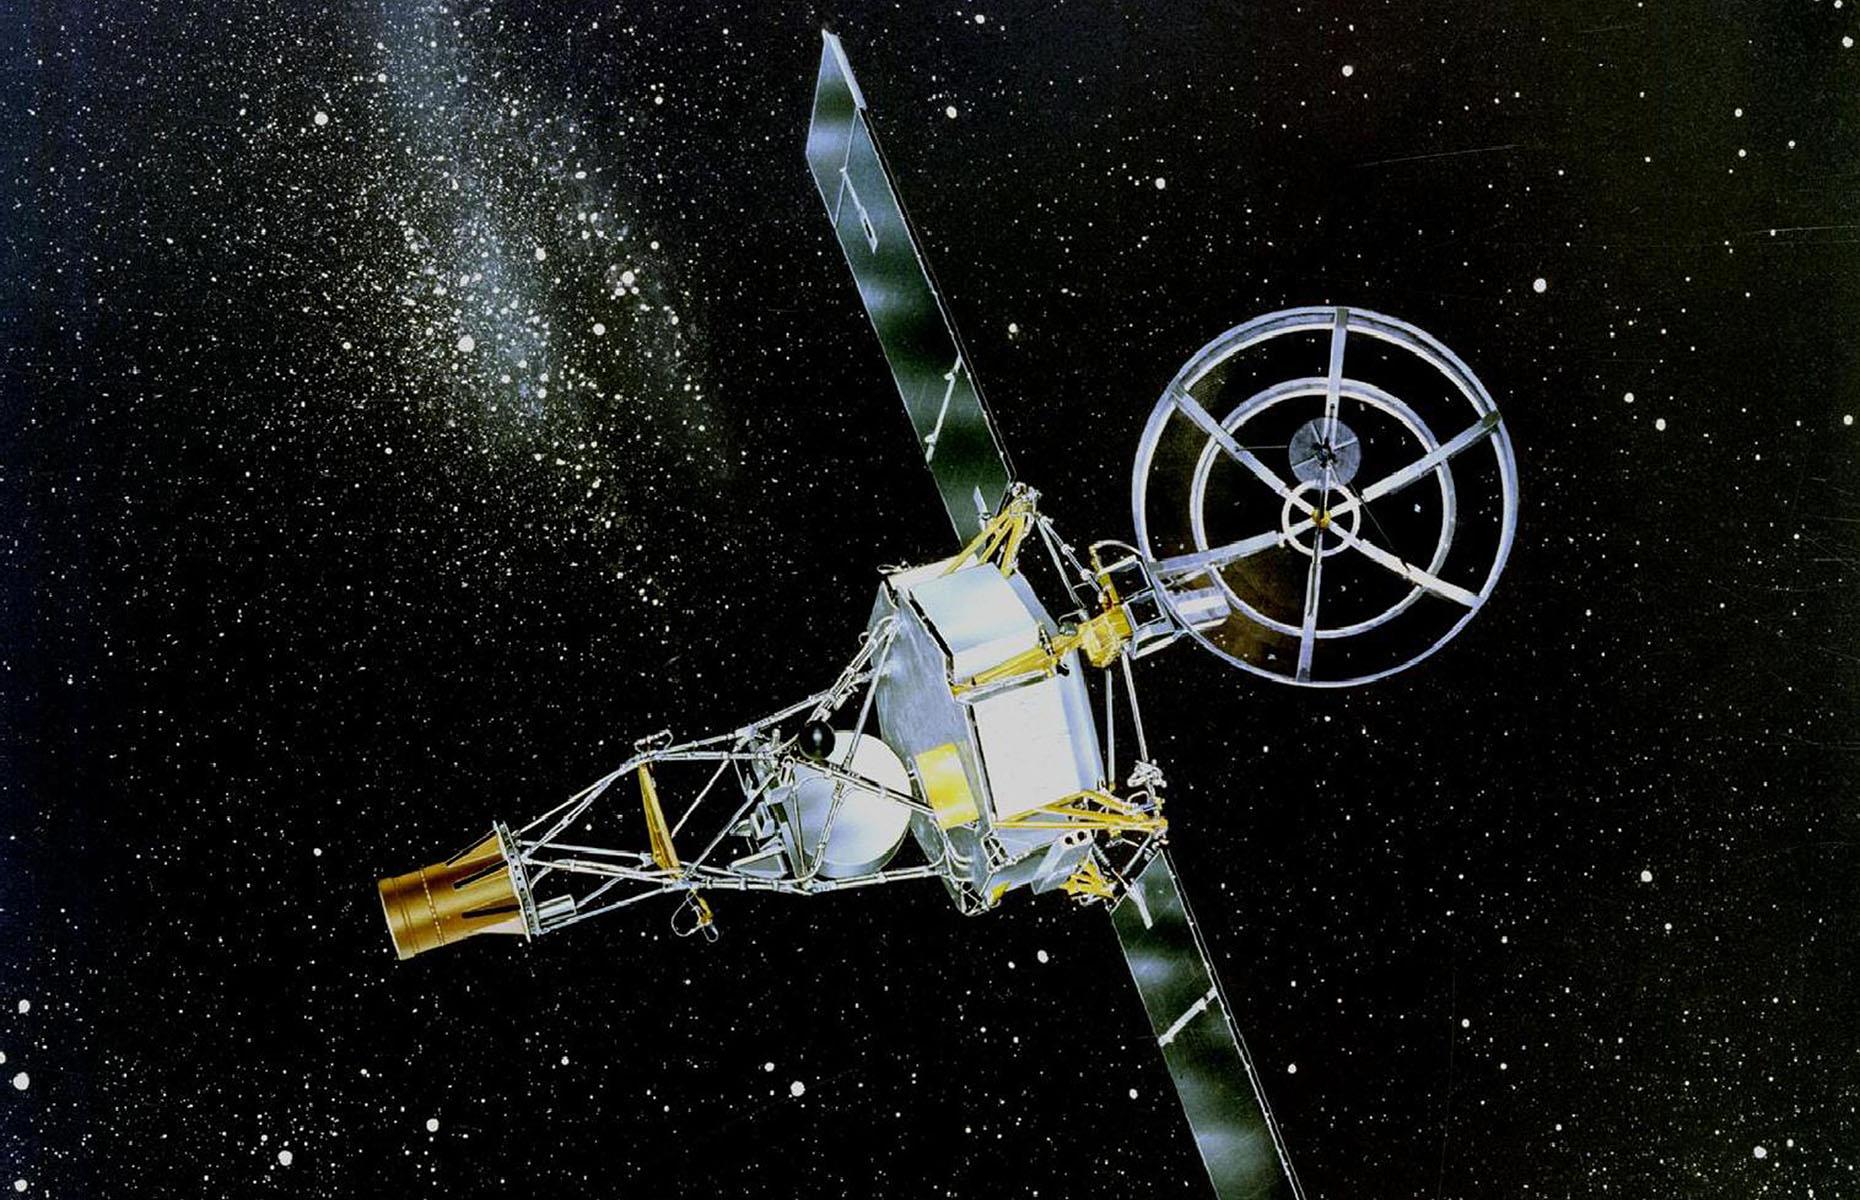 <p>The first space probe to fly by a planet, Mariner 2 passed as close as 21,607 miles to Venus on December 14, 1962. The trailblazing American craft is in orbit around the Sun and will remain circling the star until it breaks up.</p>